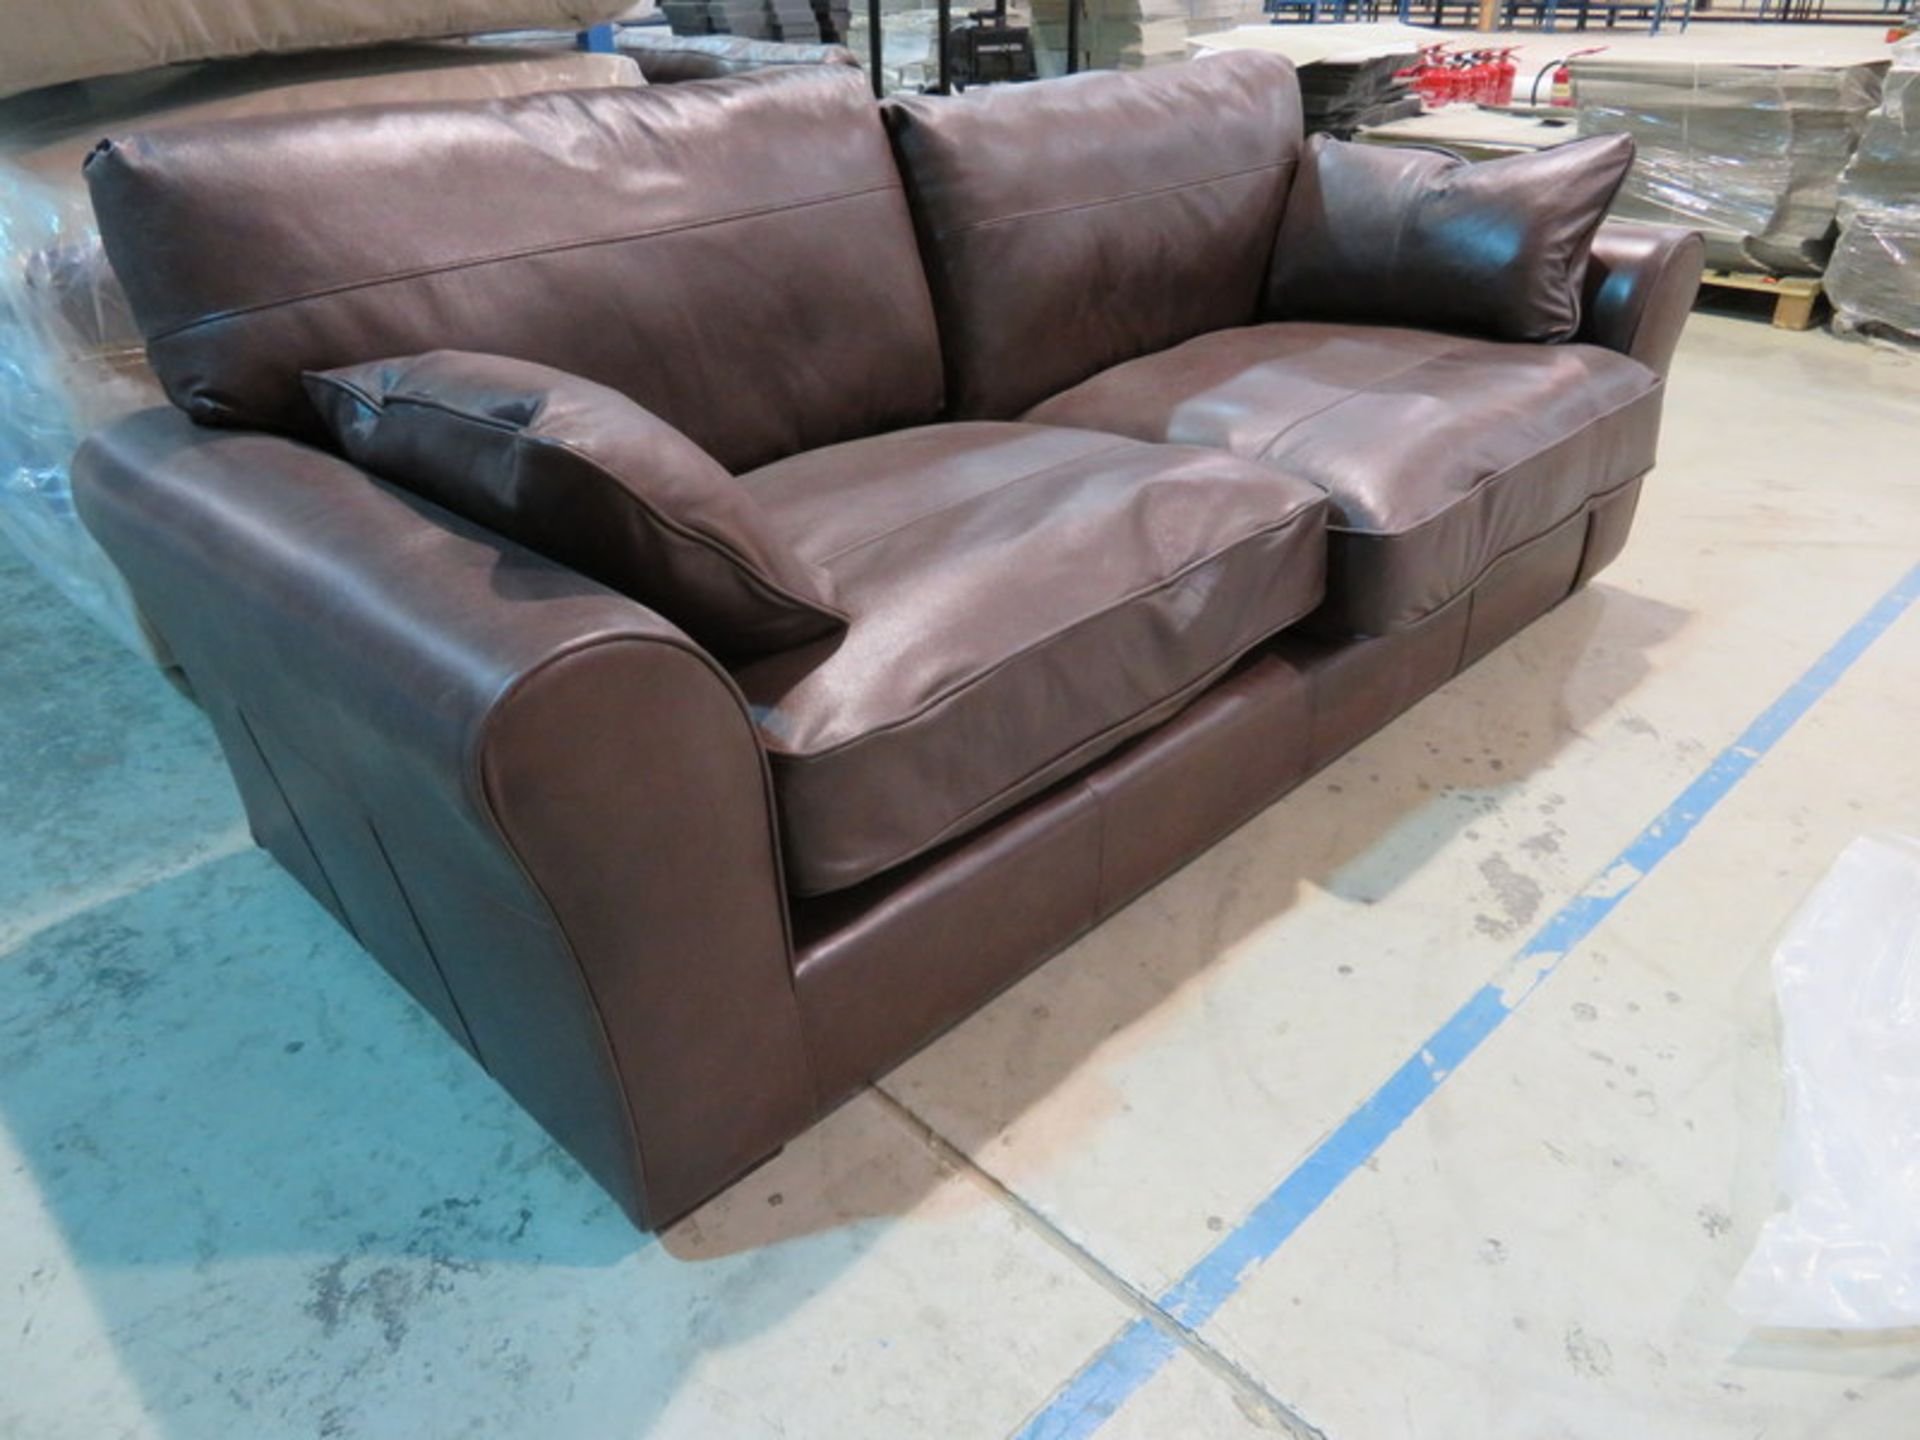 3 Seater Miracle brown 100% leather sofa. New in factory wrapping - 2200 x 970mm (LxD) - Bild 2 aus 4